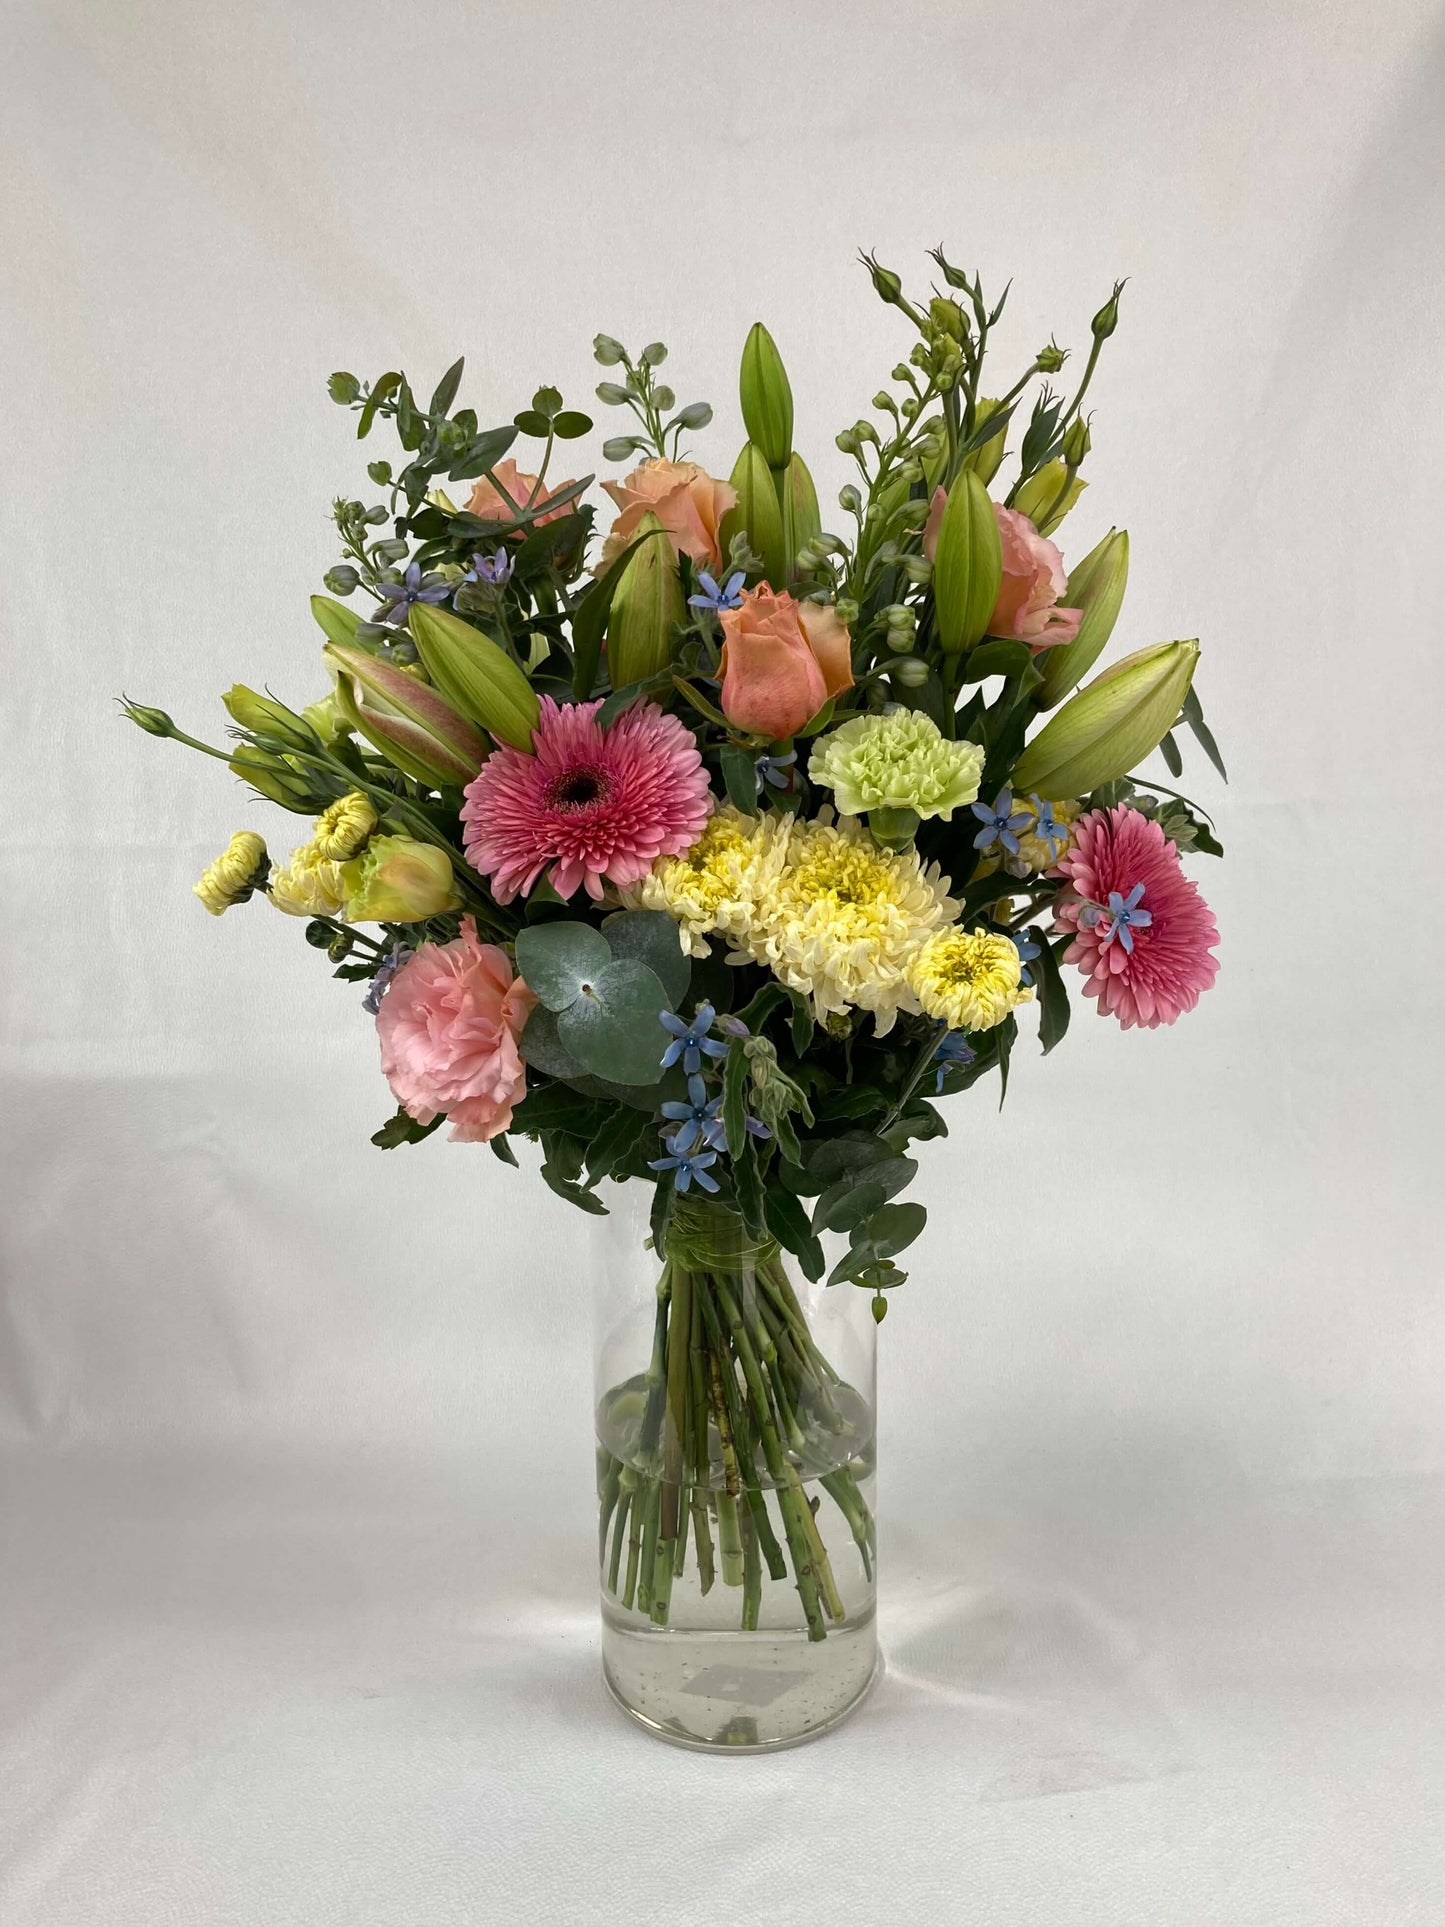 A pastel bouquet that you can receive in our flower subscription offer.